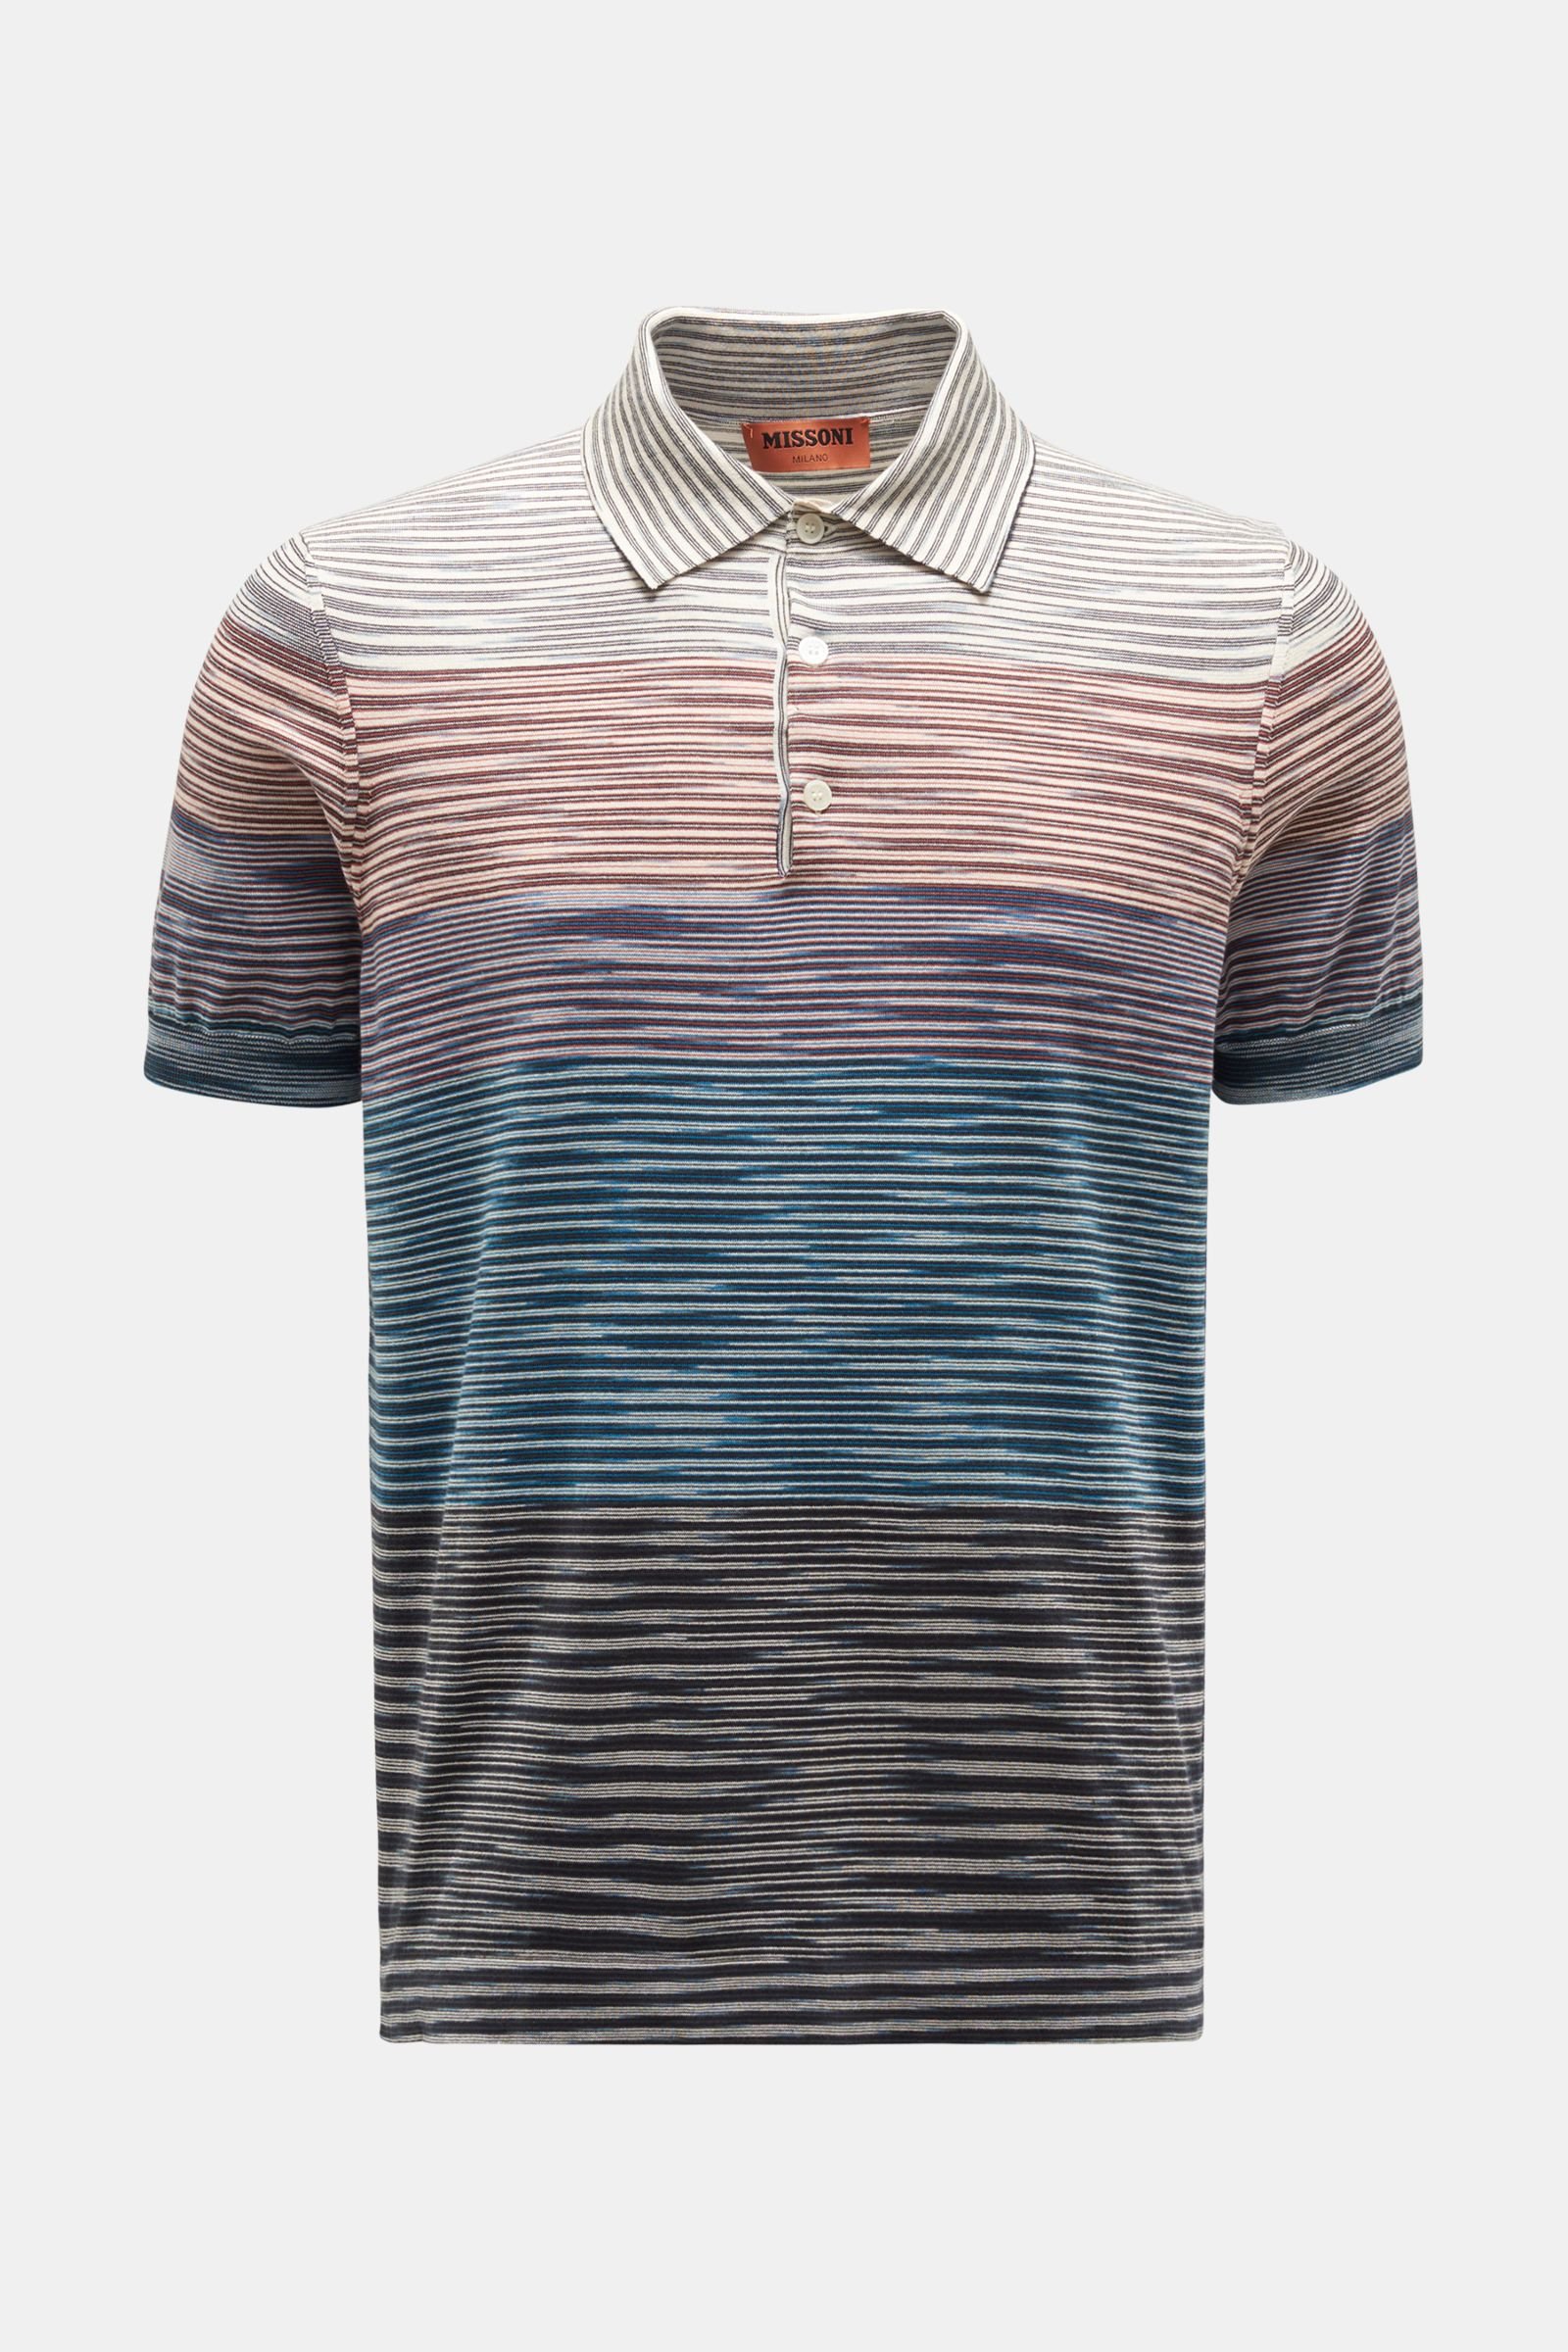 Short sleeve knit polo blue/off-white striped